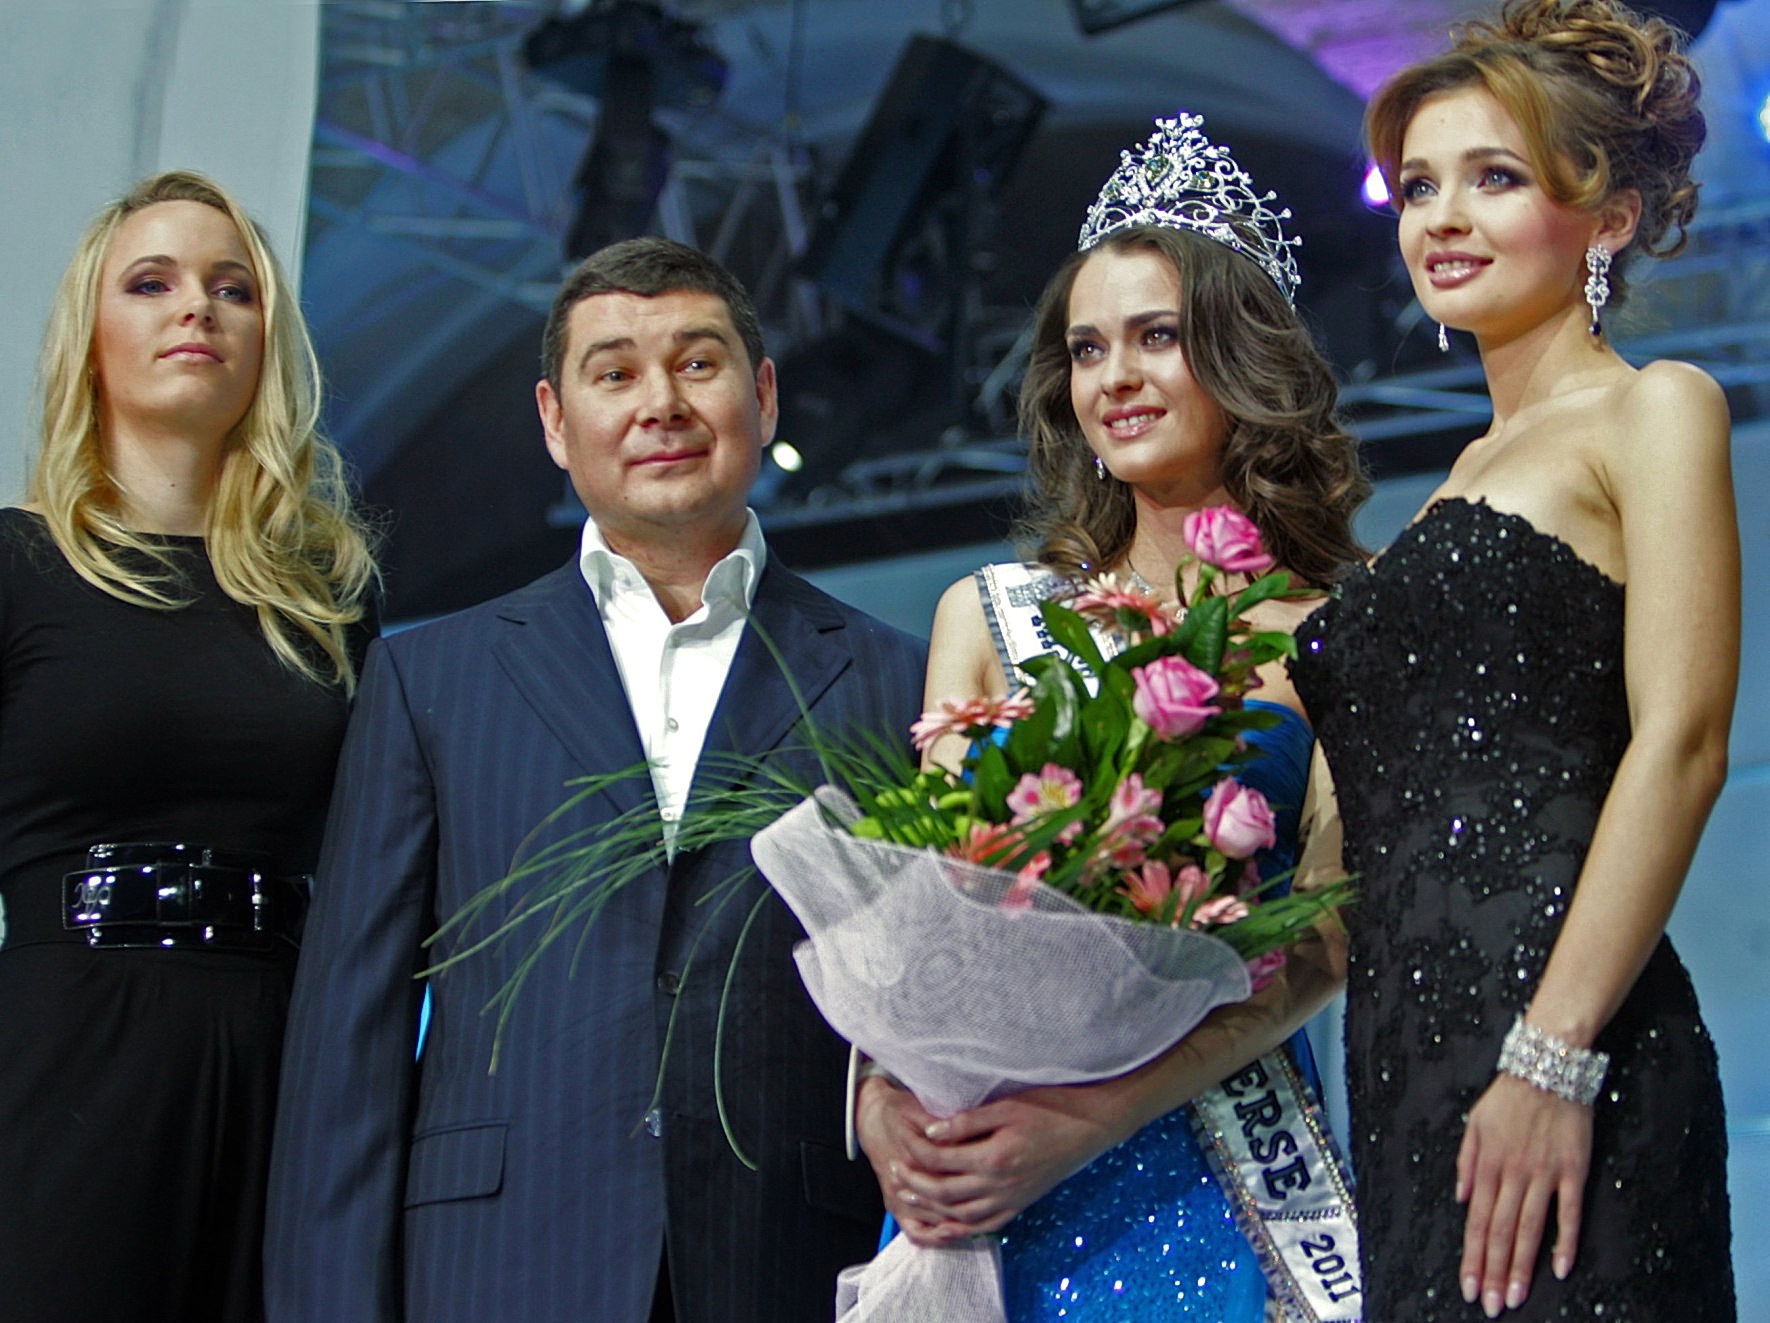 Alexander Onishchenko, a businessman and an owner of a beauty pageants “Miss Ukraine” and “Miss Ukraine Universe”, surrounded by one of the world’s top tennis player Caroline Wozniacki (L), a winner of the Miss Ukraine Universe 2011, Olesya Stefanko (C), and Miss Ukraine Universe 2010 Anna Poslavskaya (R). They are posing for a photograph during the final show of the beauty contest Miss Ukraine Universe 2011 in Kyiv on Dec. 11, 2010.